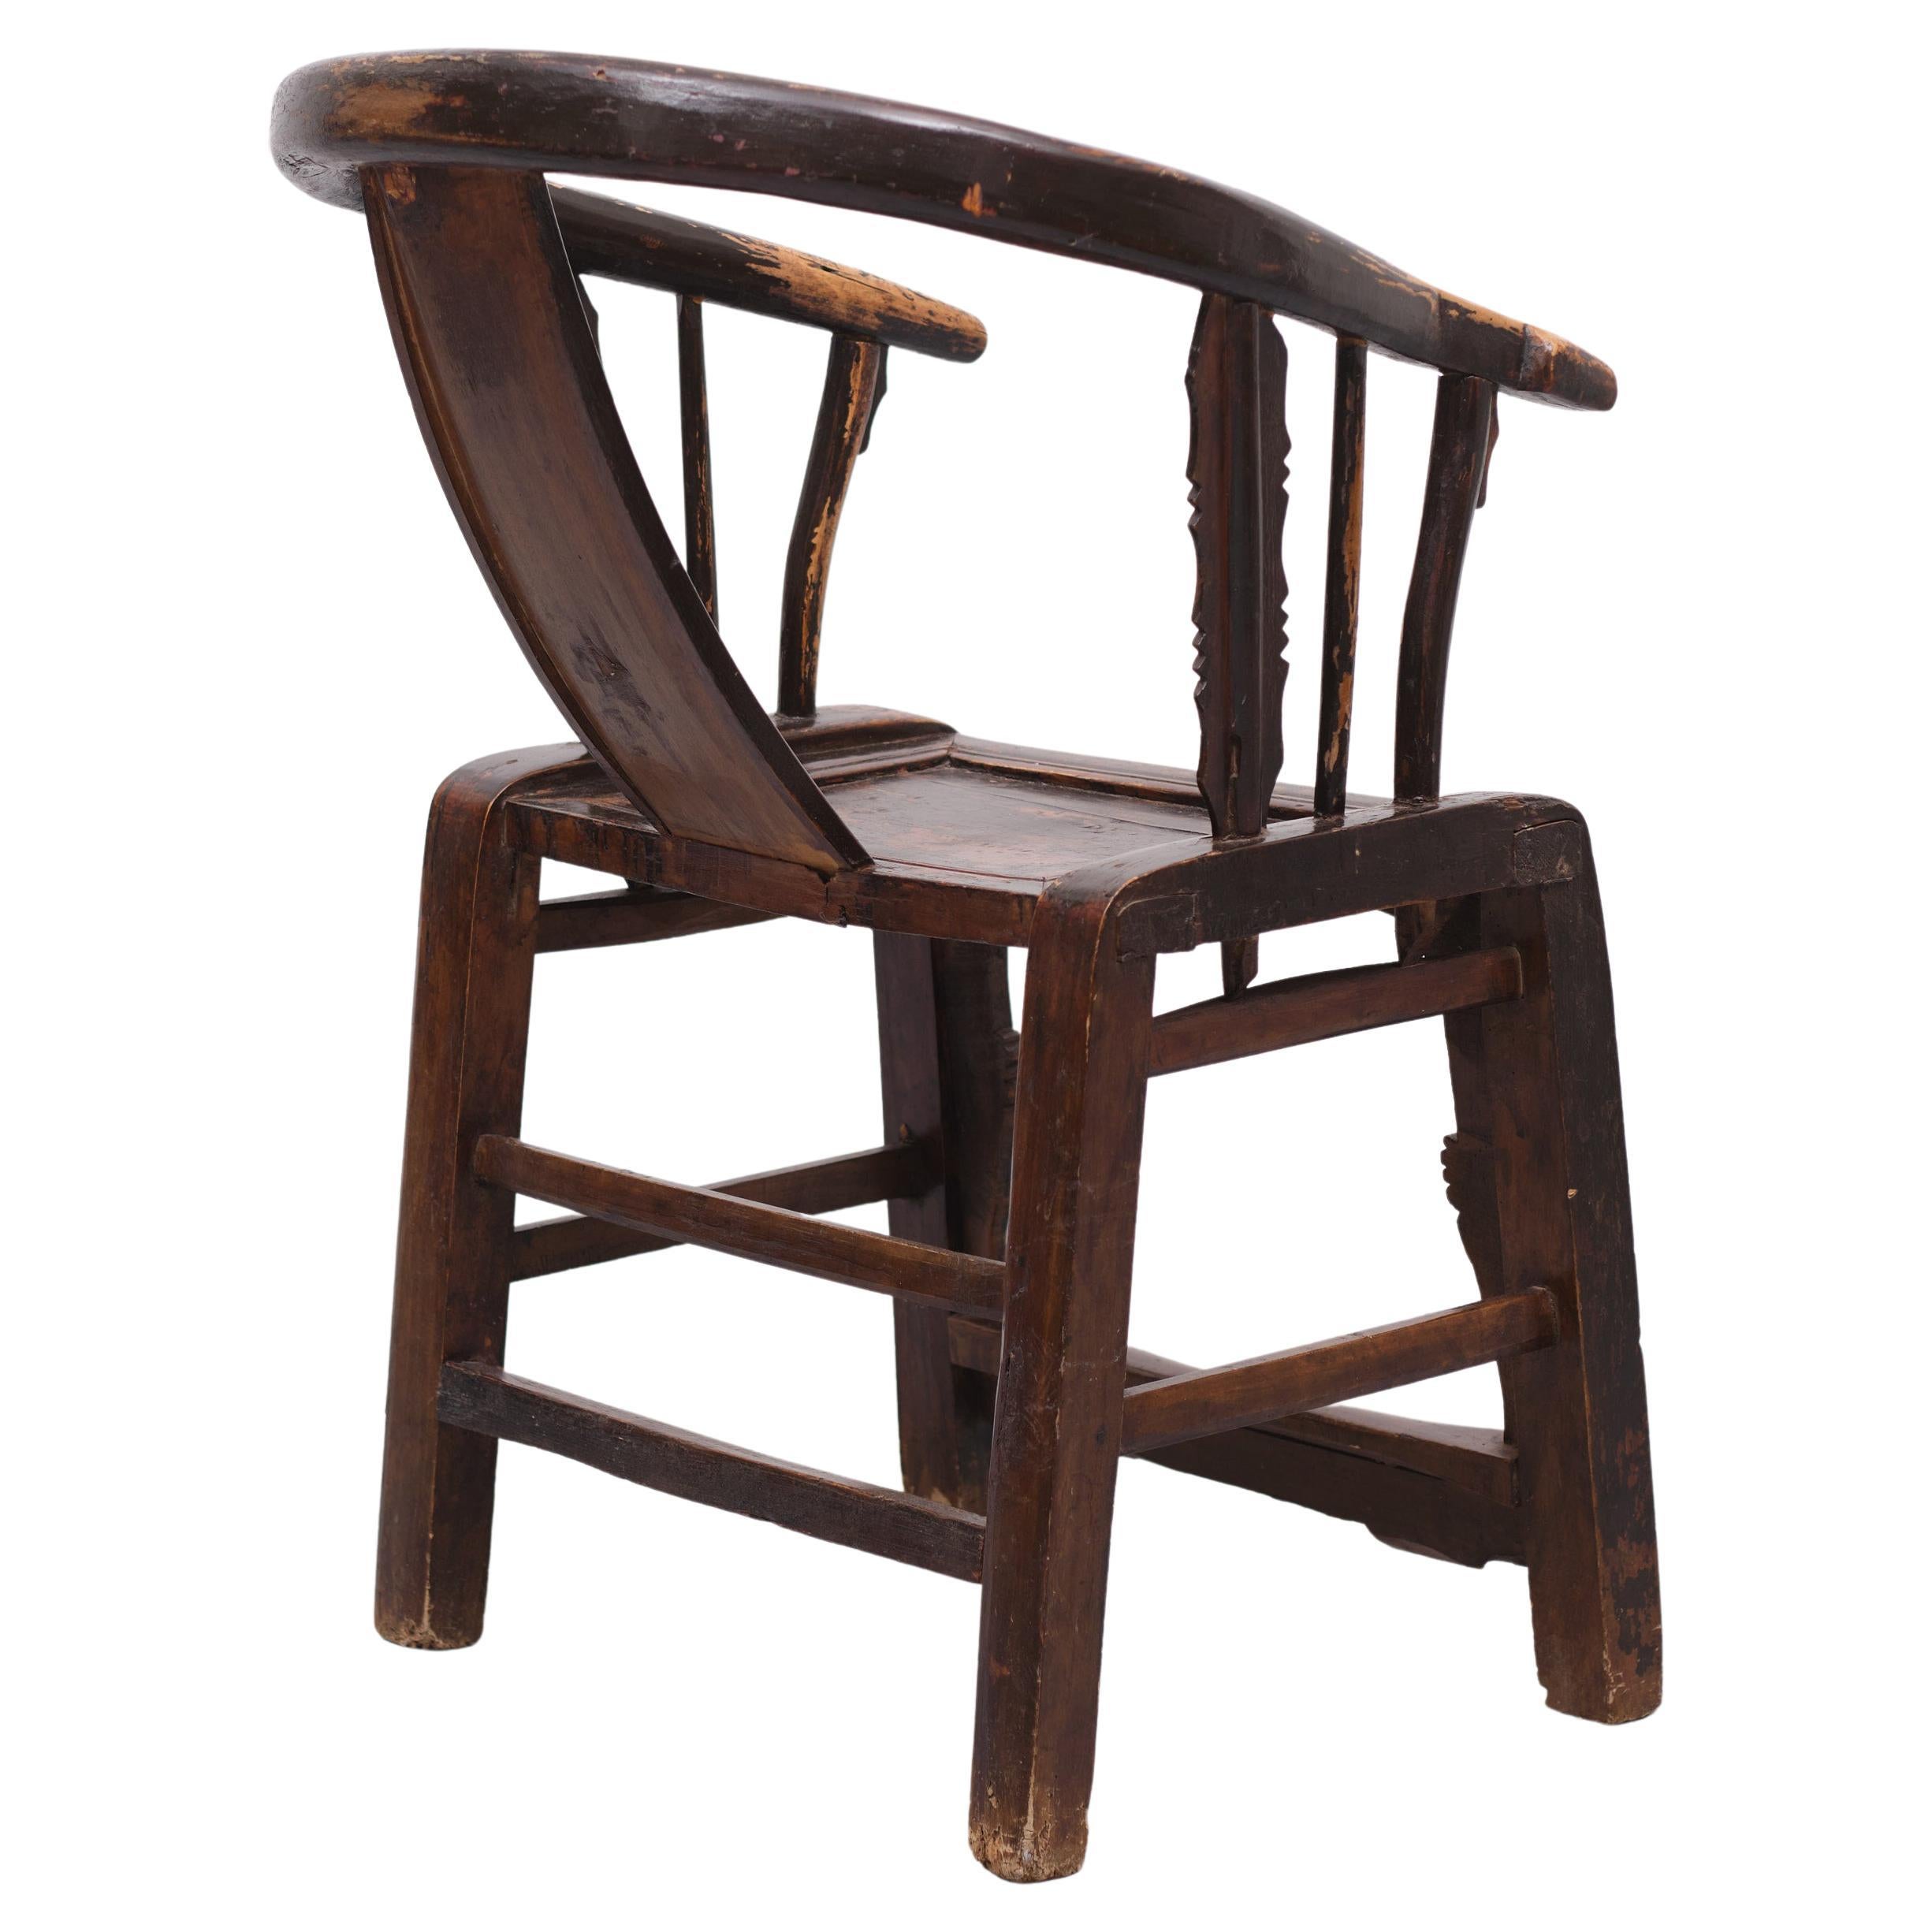 Must love this Chinese armchair beautiful distressed painted finish.
Elm wood. Horseshoe shaped back. the construction is very good.
Lovely decorative chair. Superb patine. 

 